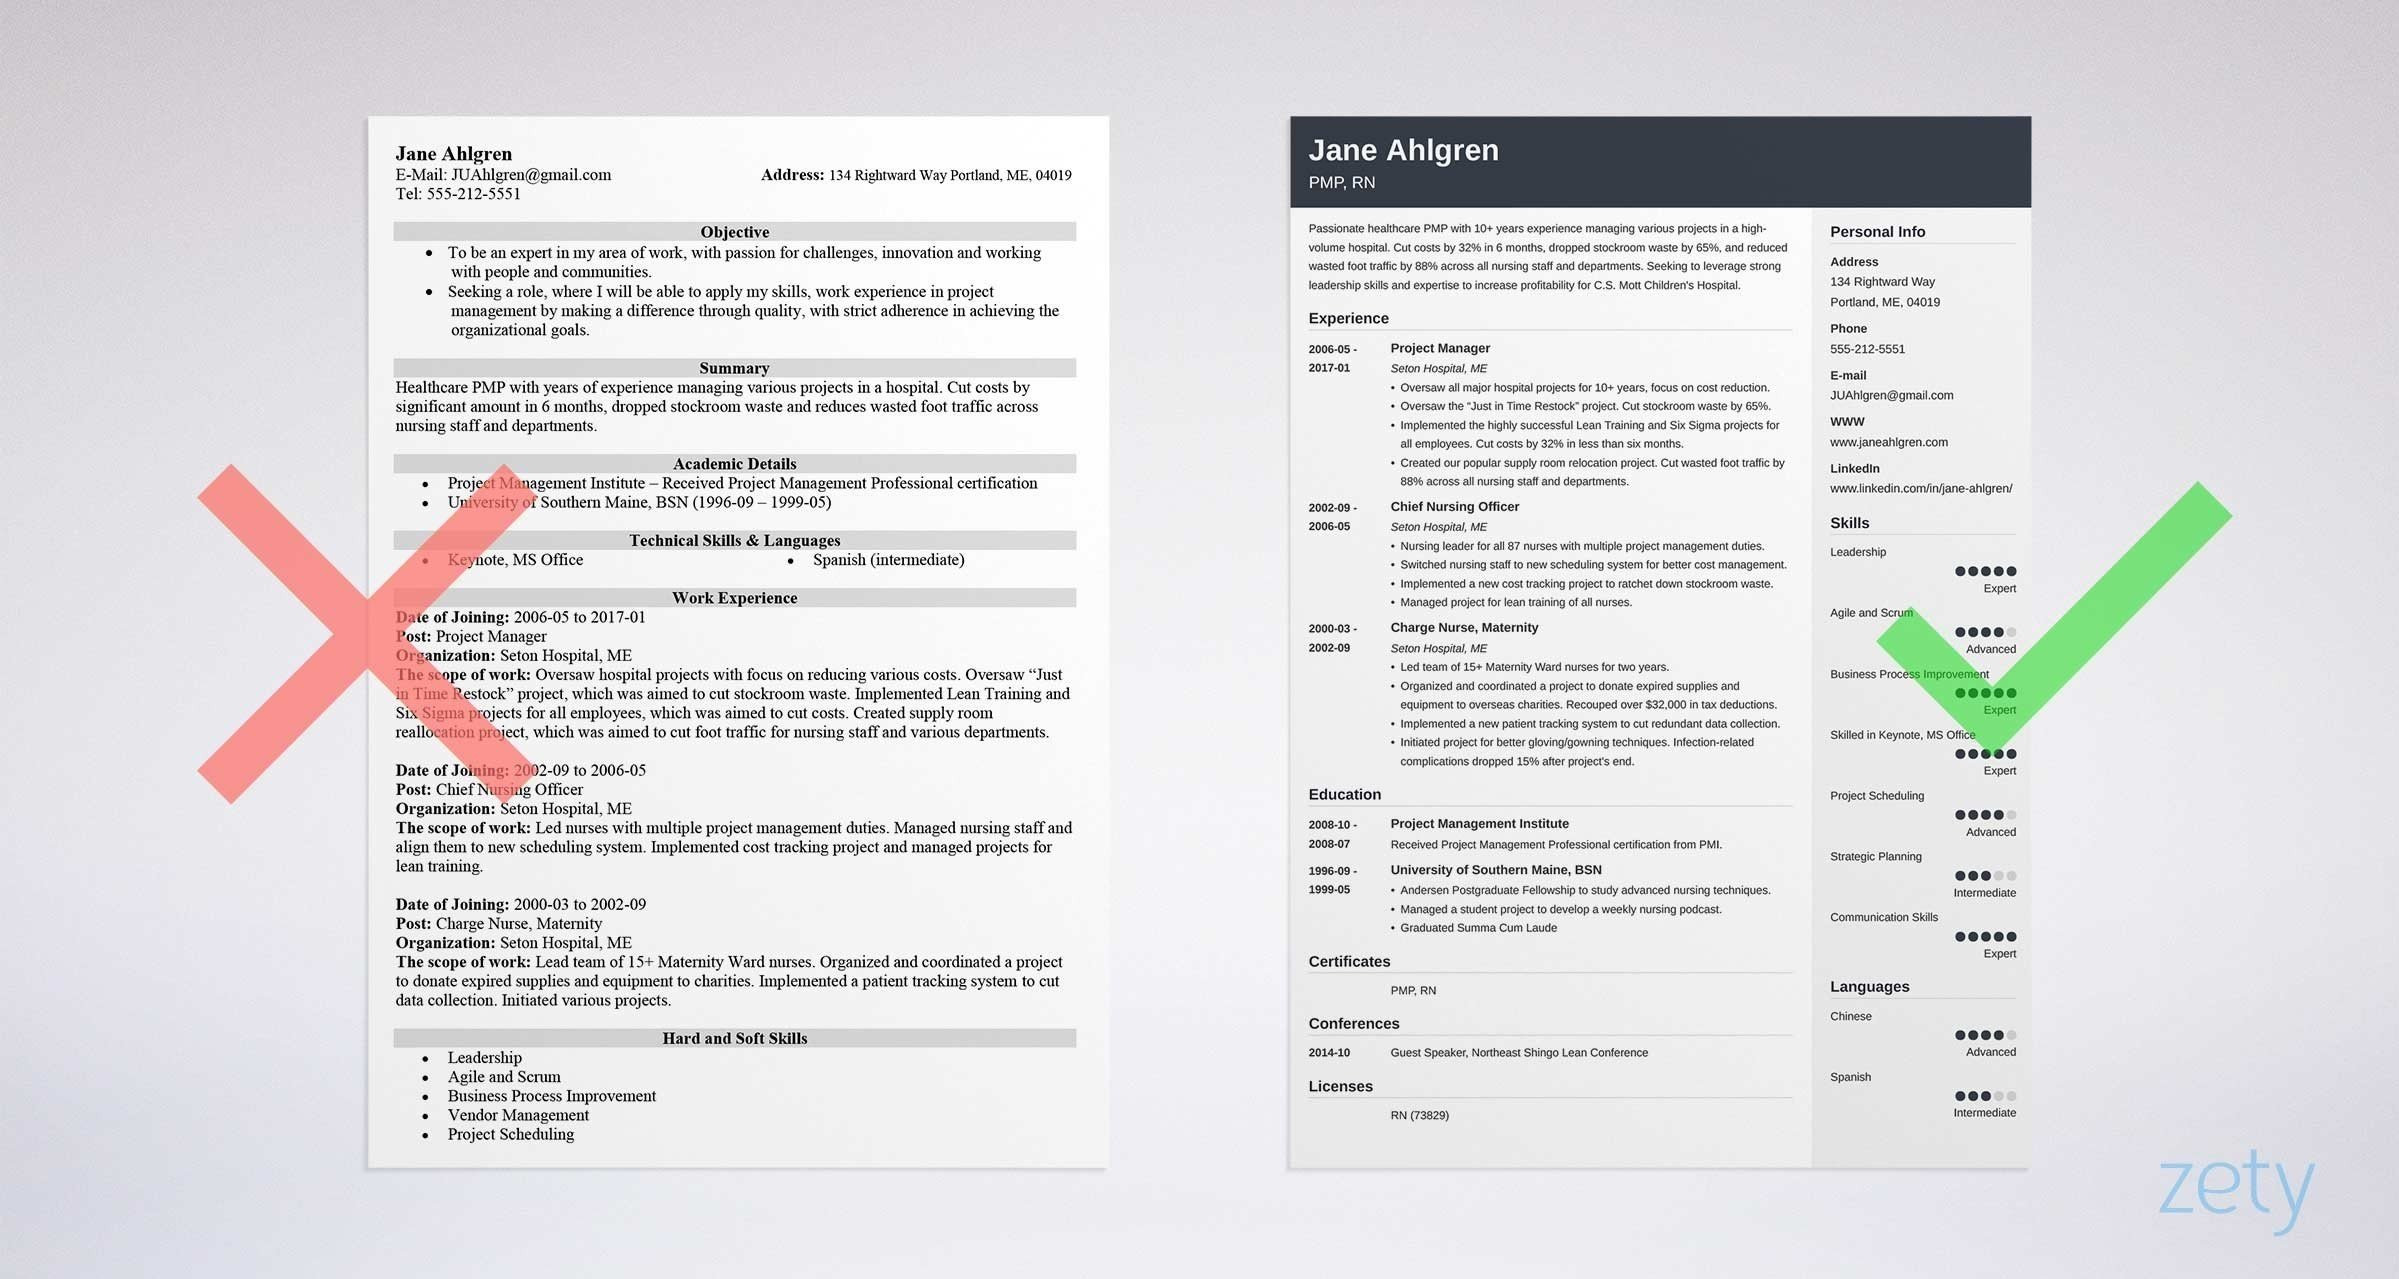 Sample Of Resume Using Star Method How to Use Star Method Technique for Interview Questions